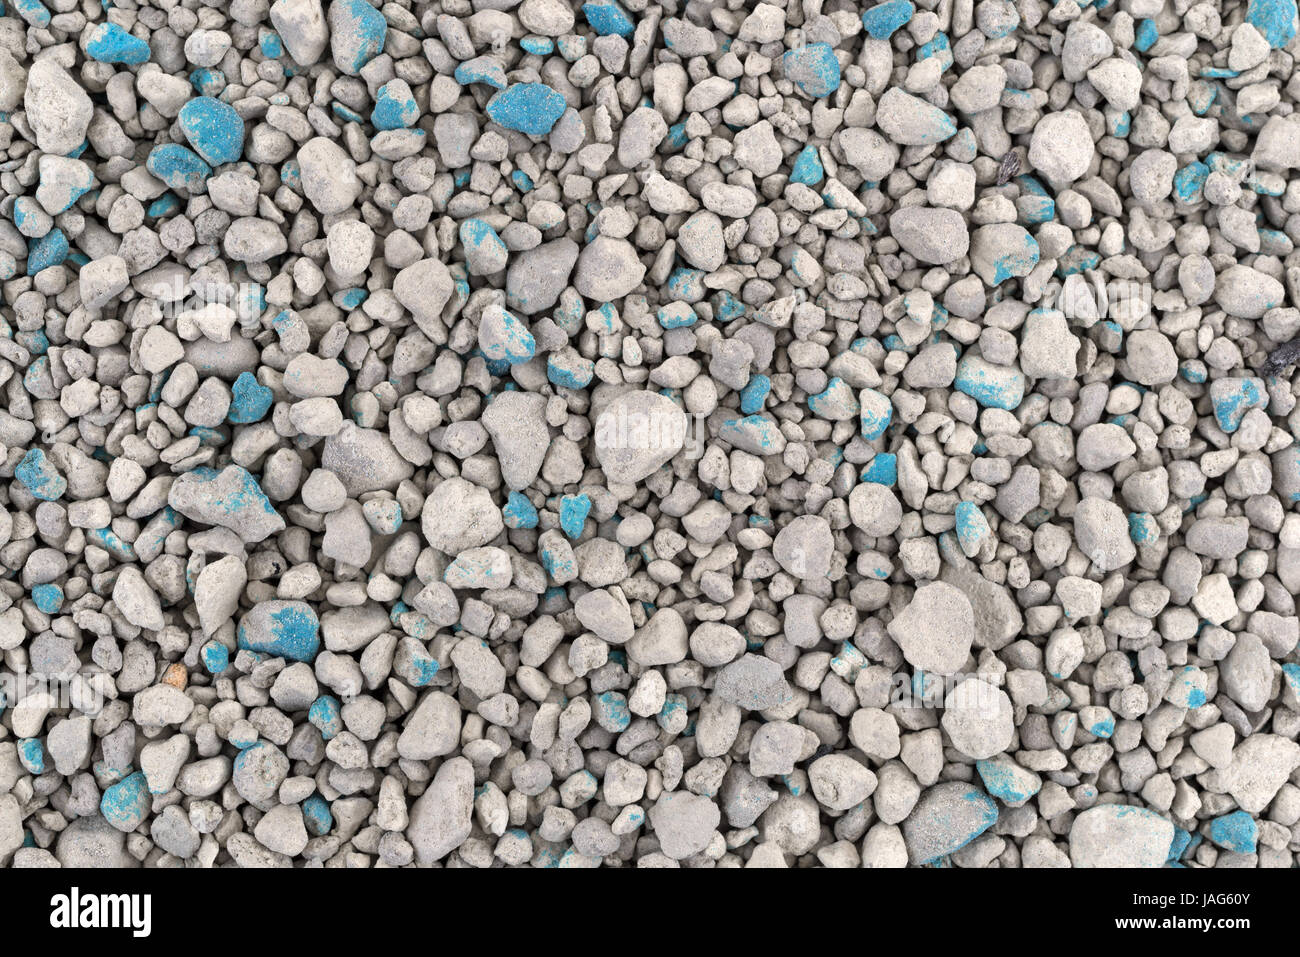 Very close view of a layer of ground clay cat litter. Stock Photo